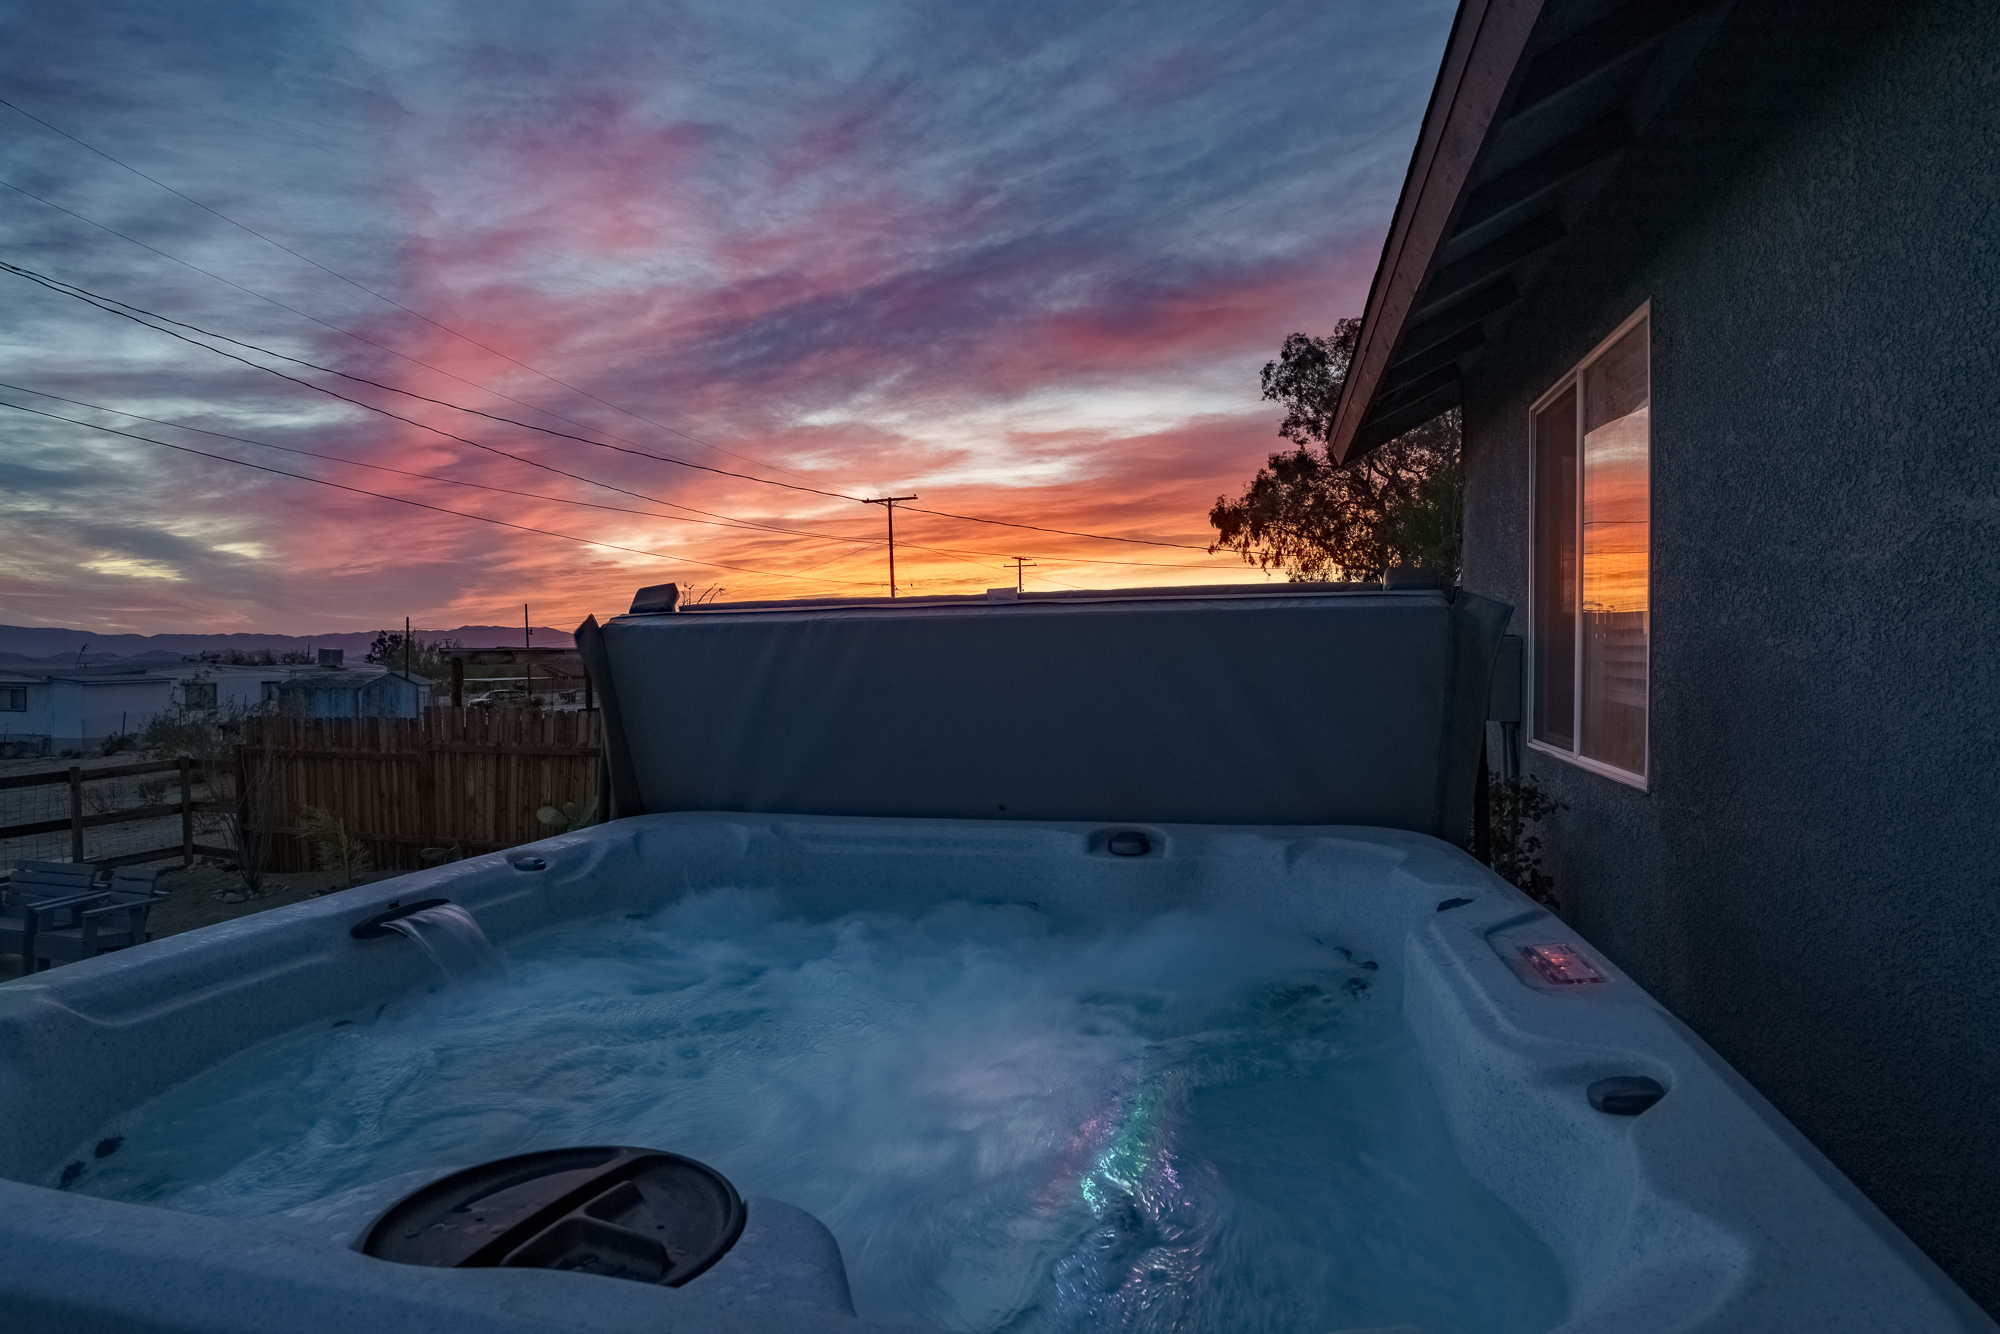 Hot tub with a view of the sunrise in the desert